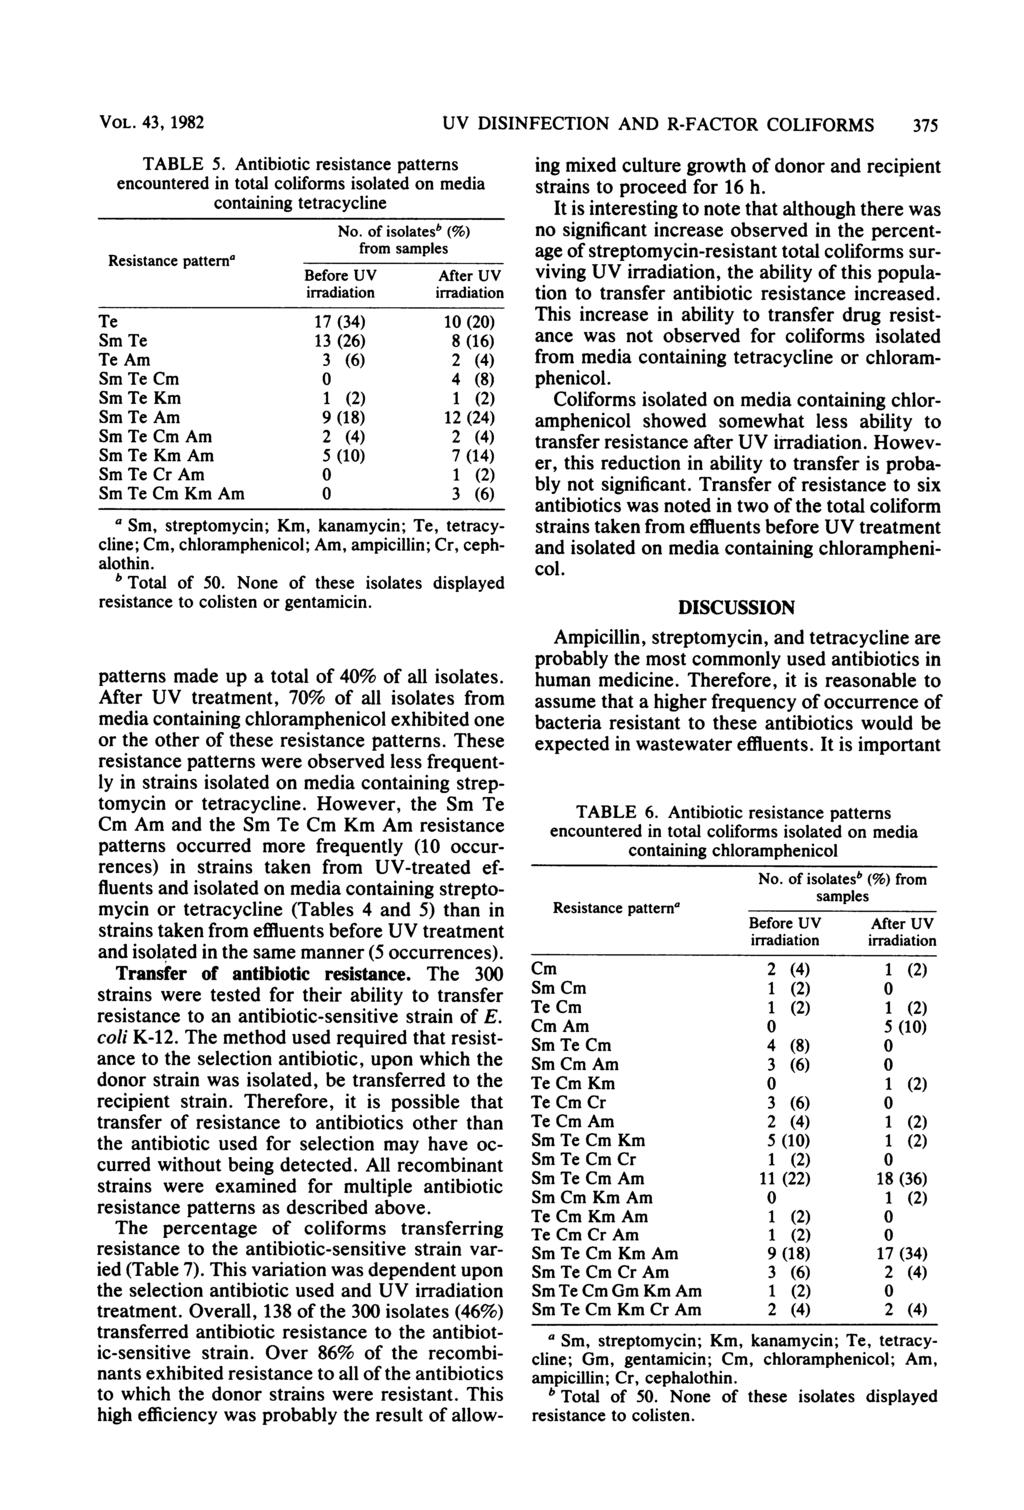 VOL. 43, 1982 TABLE 5. Antibiotic resistance patterns encountered in total coliforms isolated on media containing tetracycline No.